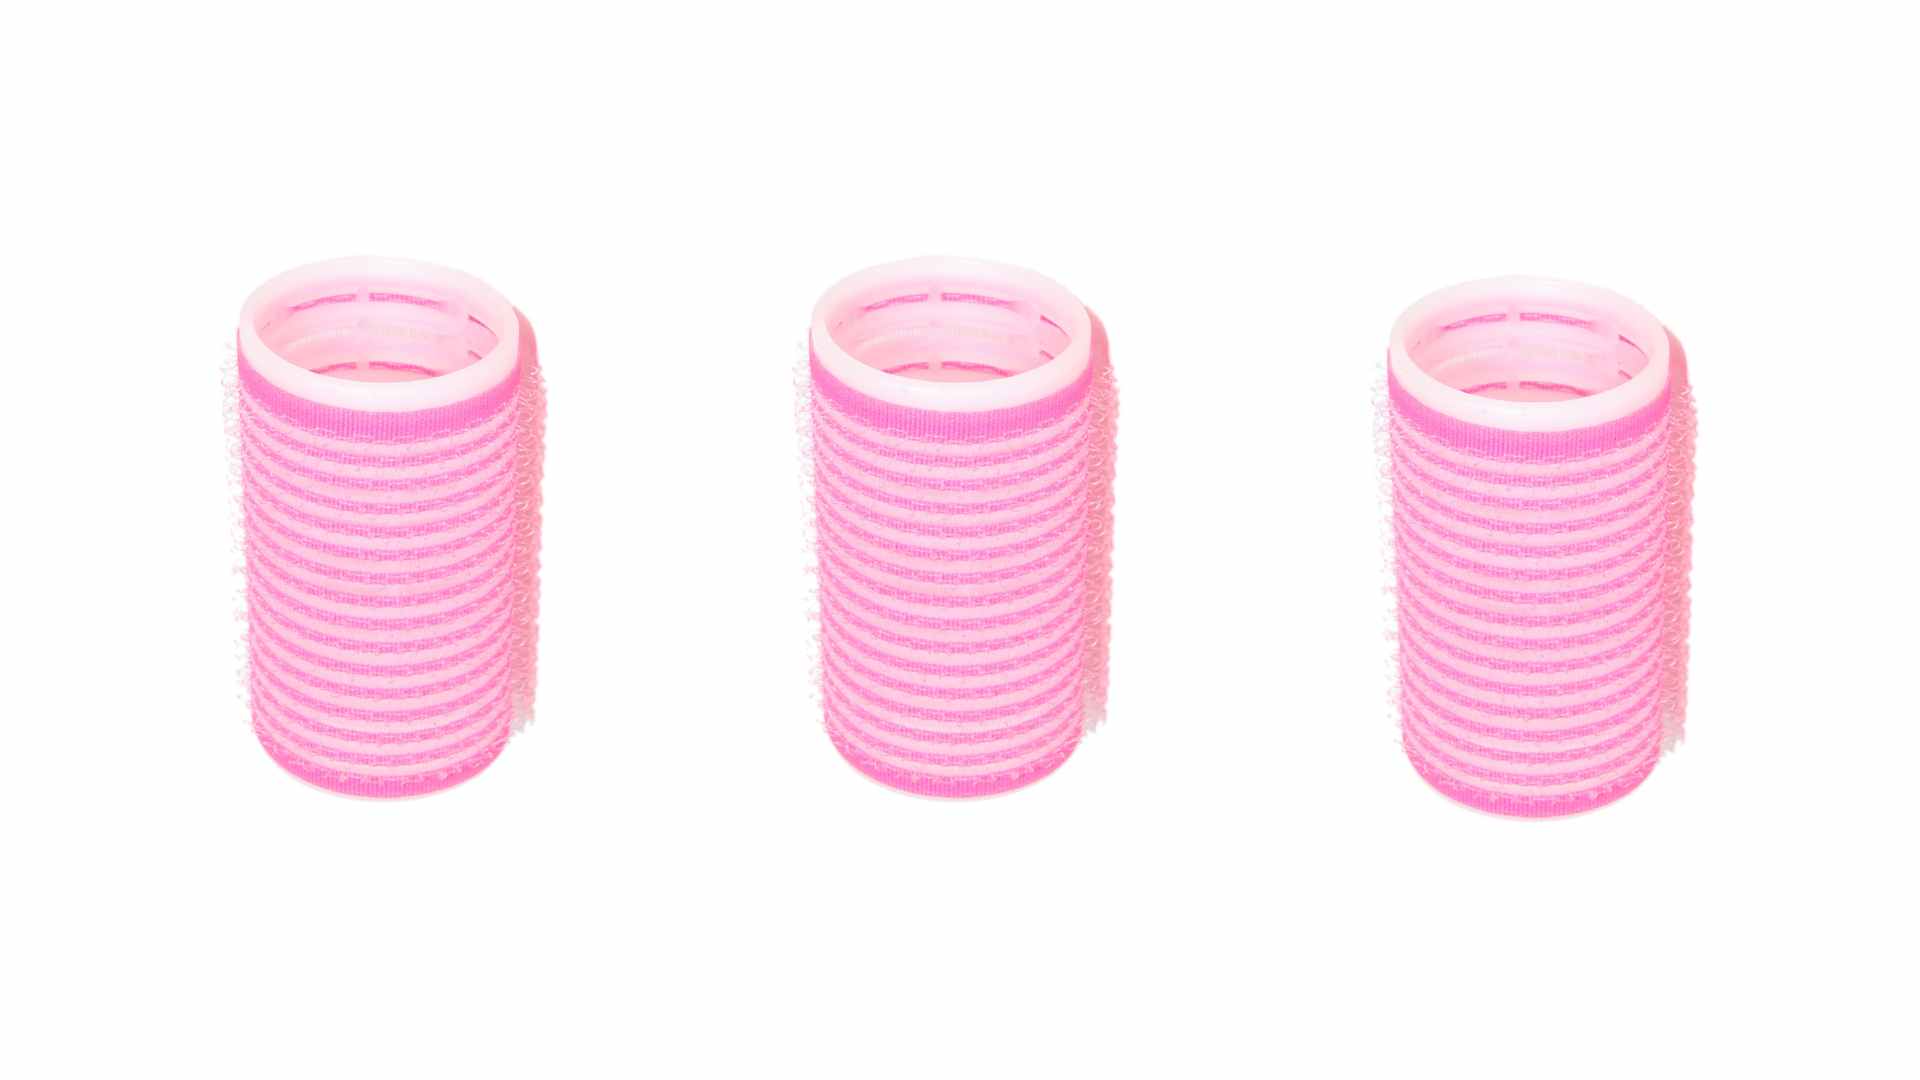 3 pink velcro rollers